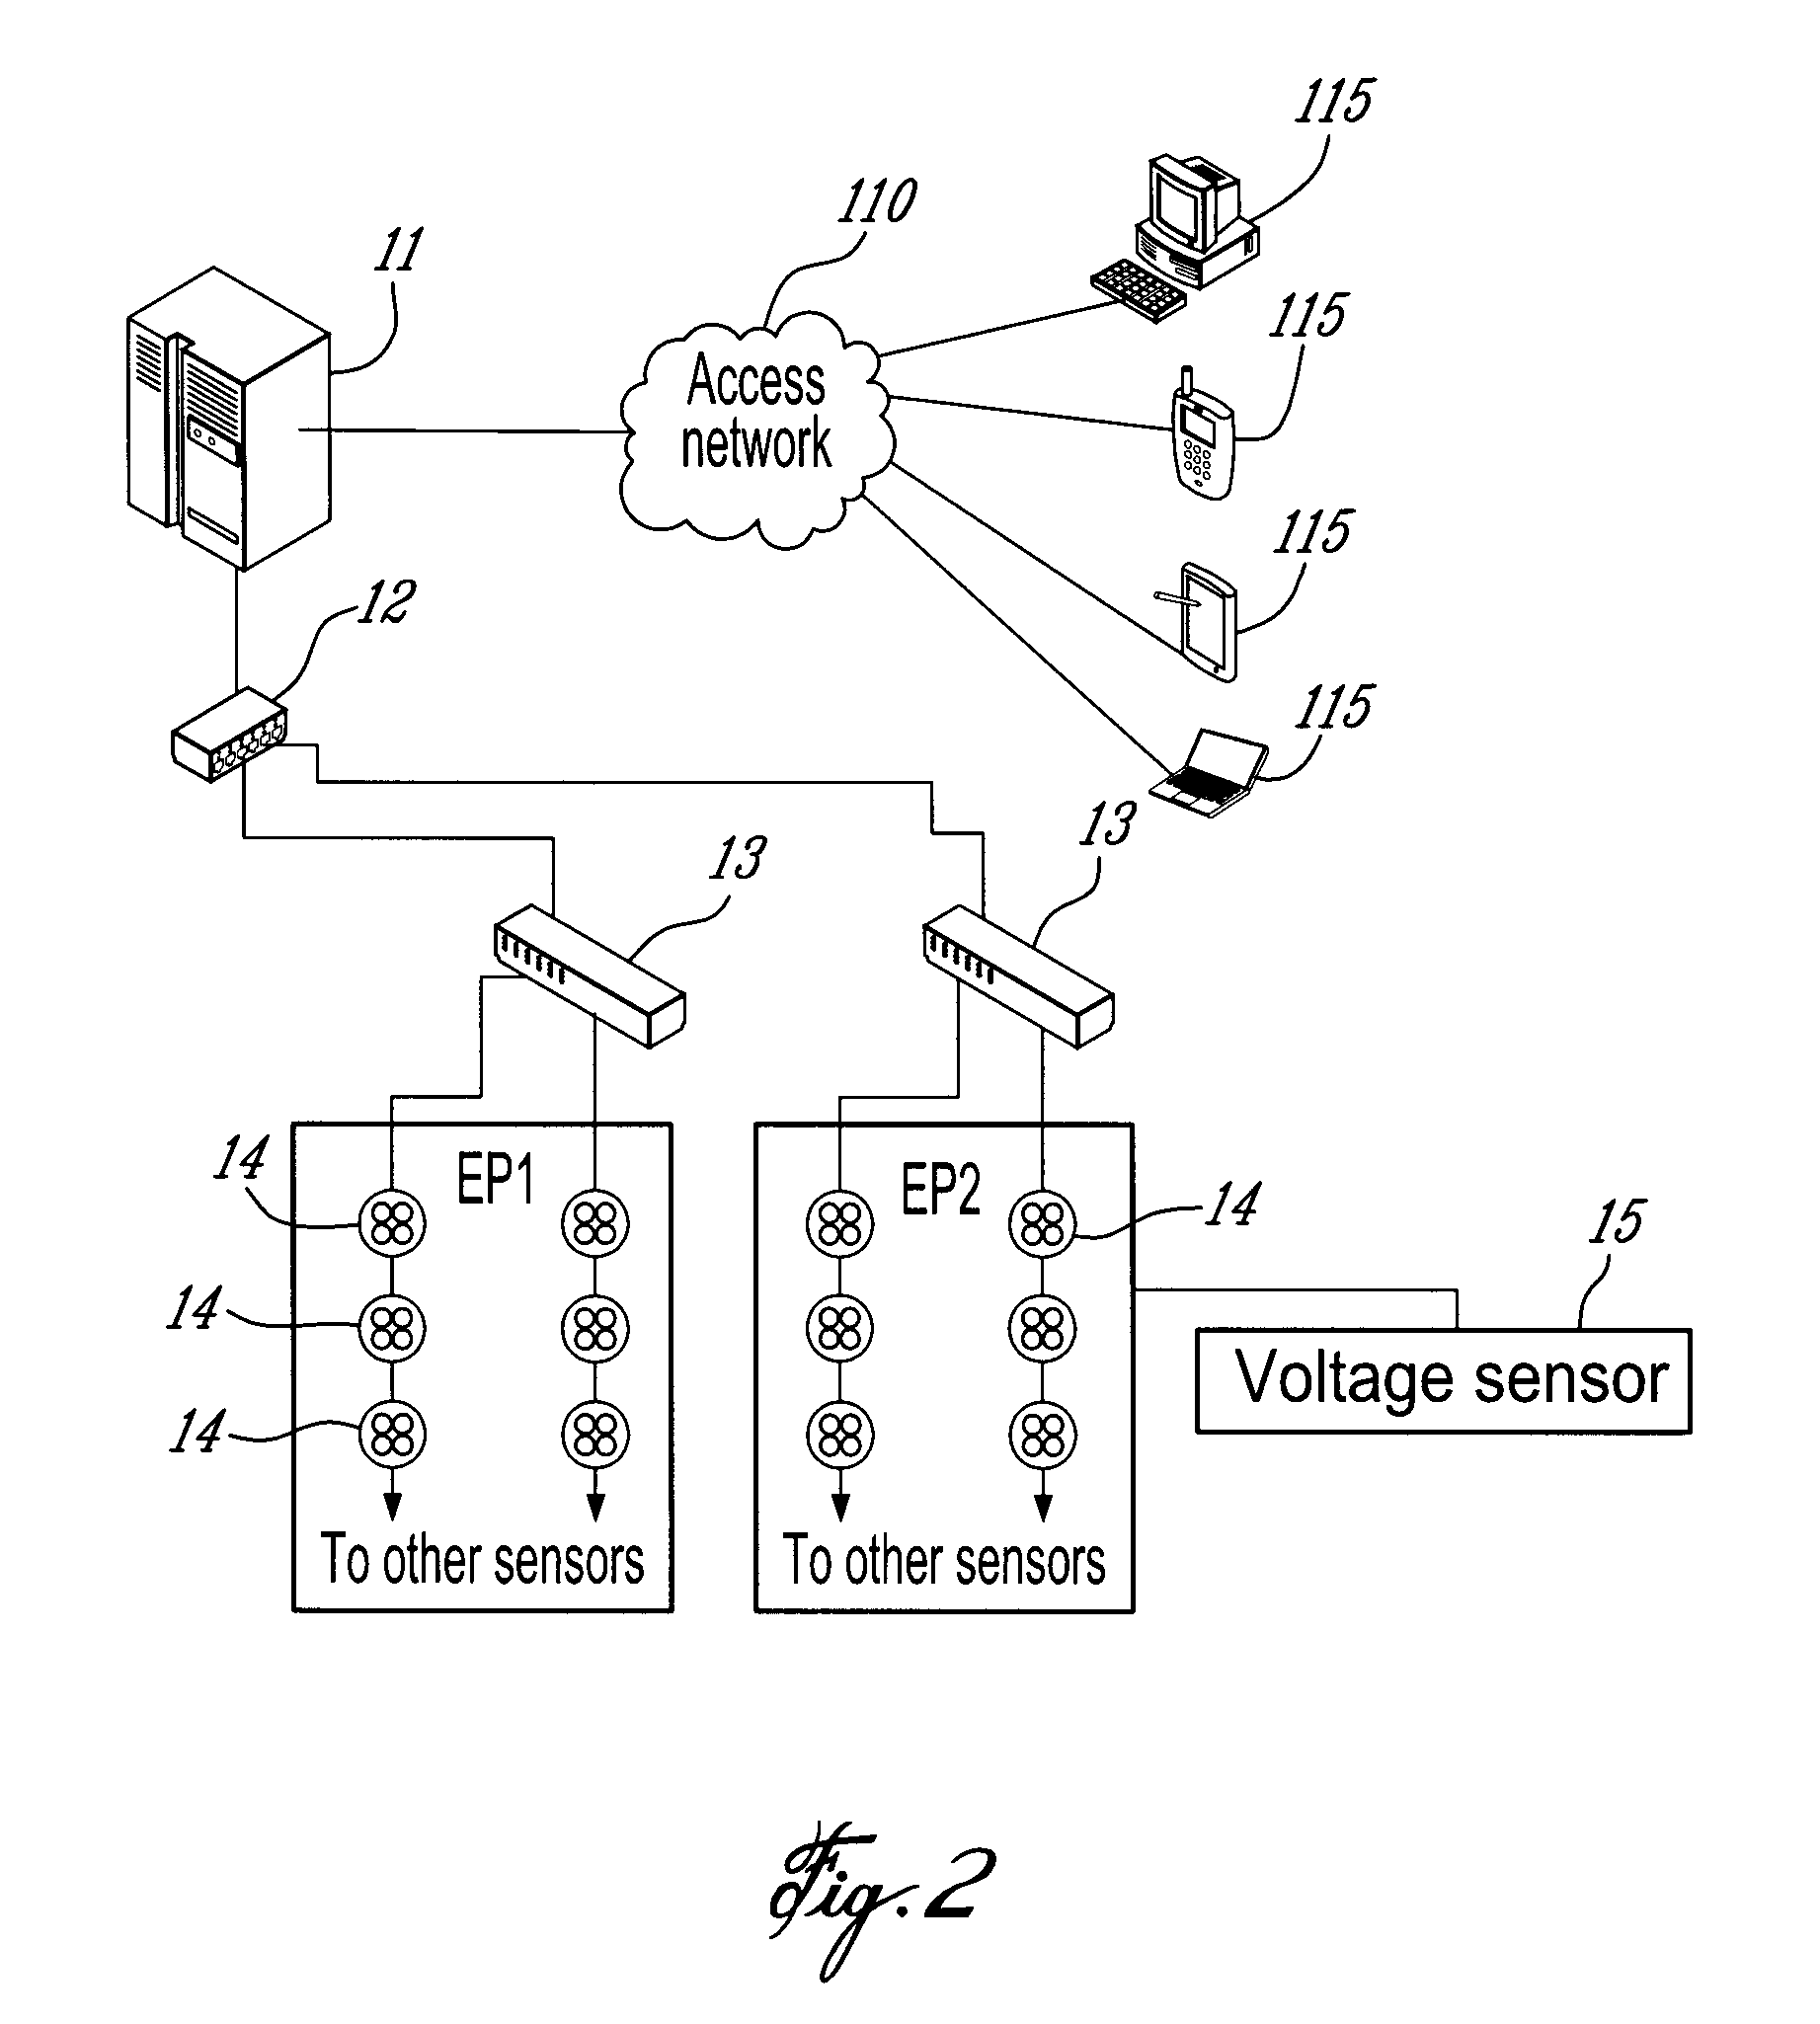 Electrical anomaly detection method and system